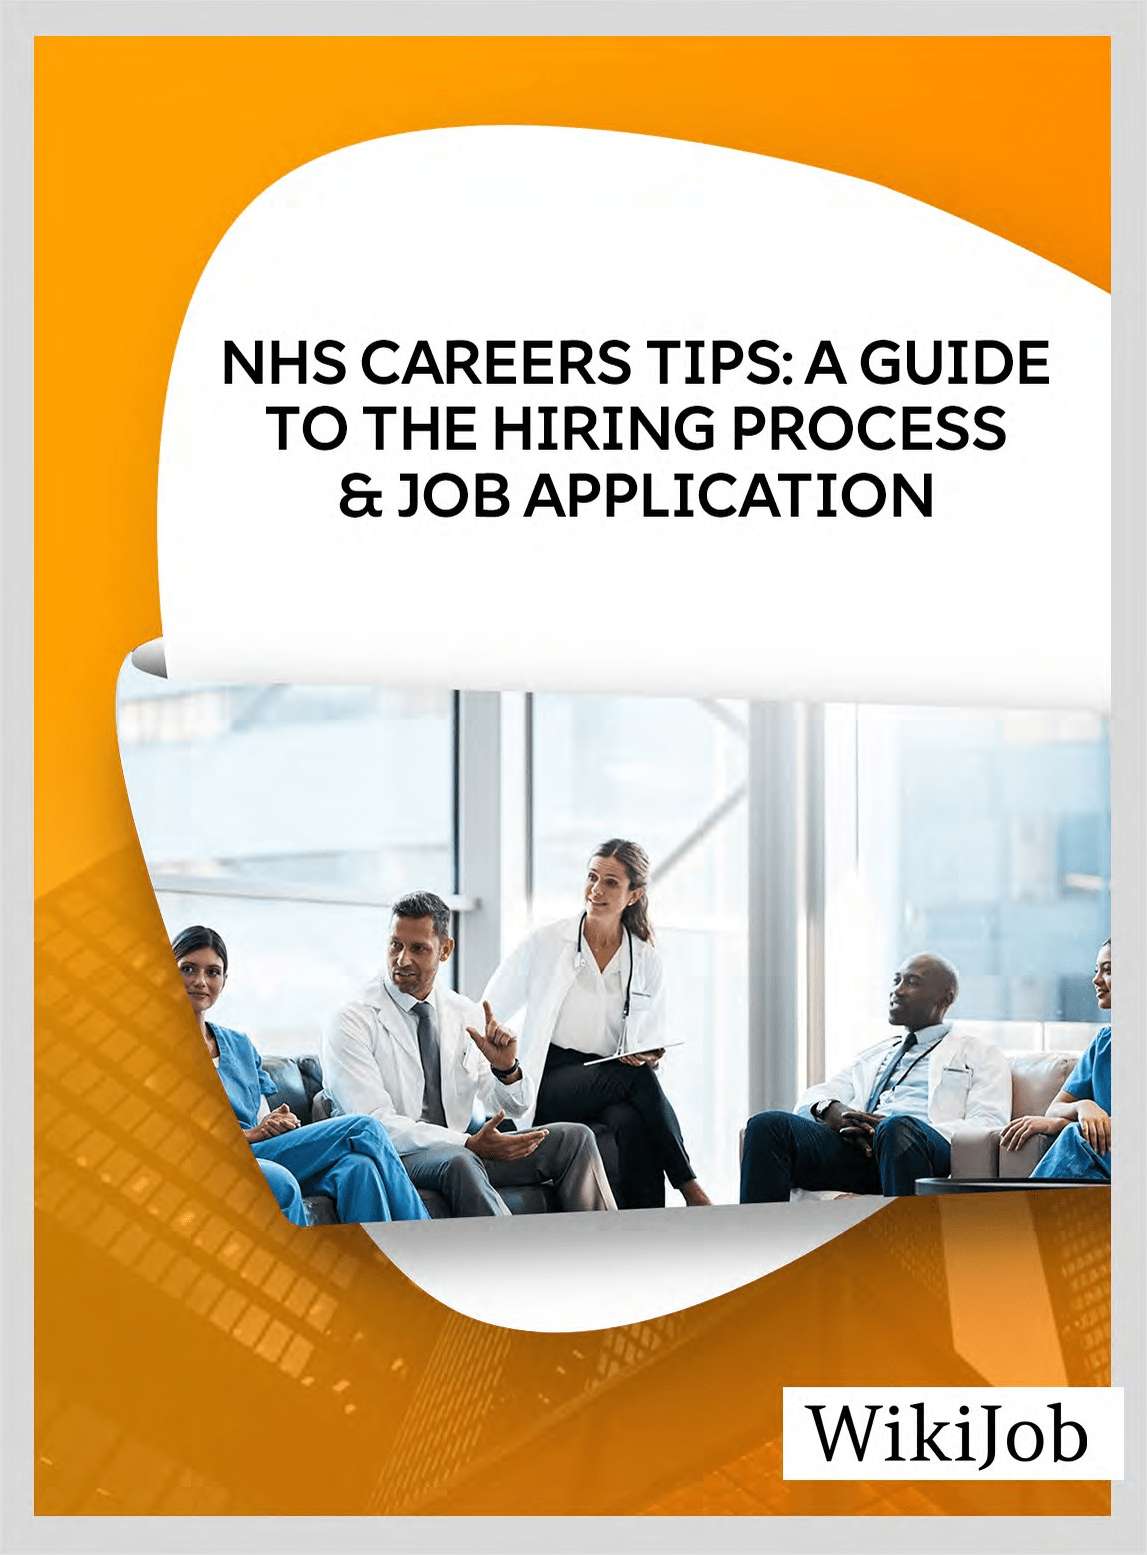 NHS Careers Tips: A Guide to the Hiring Process & Job Application